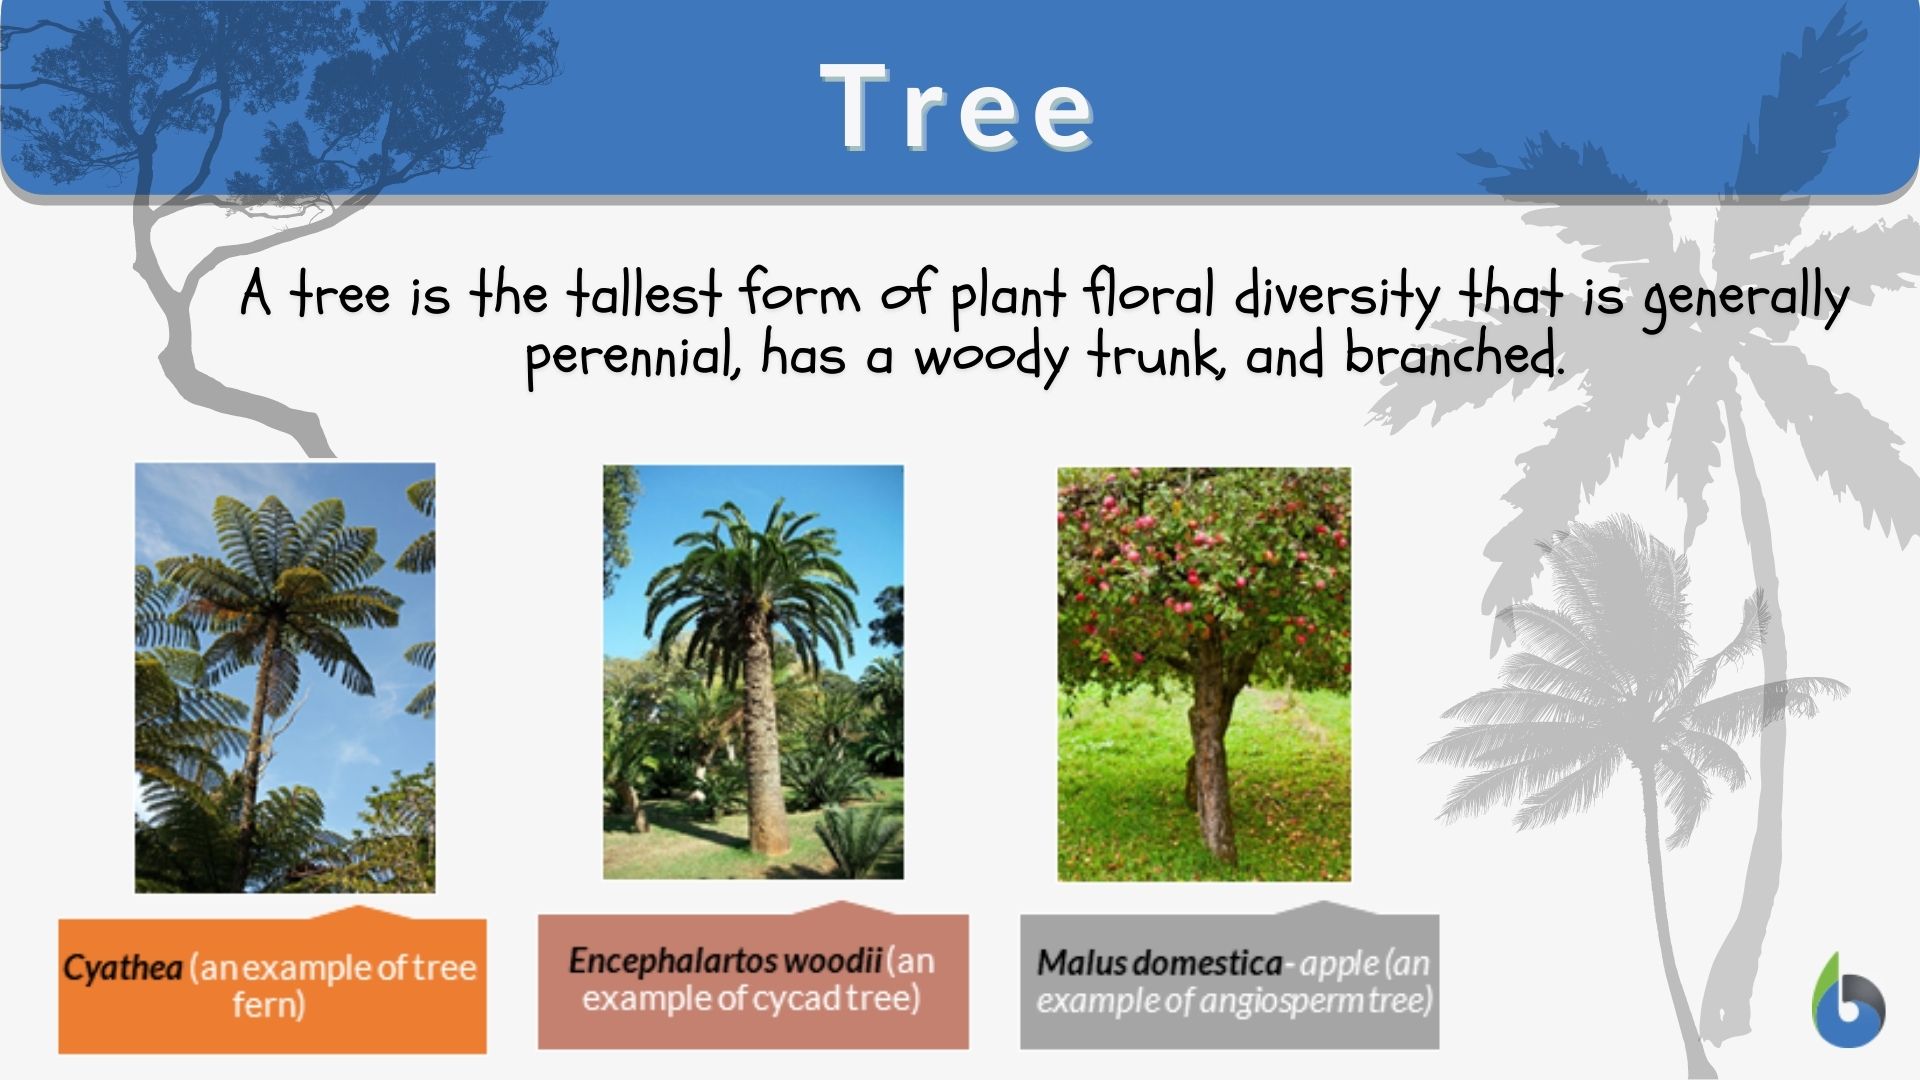 Tree - Definition and Examples - Biology Online Dictionary